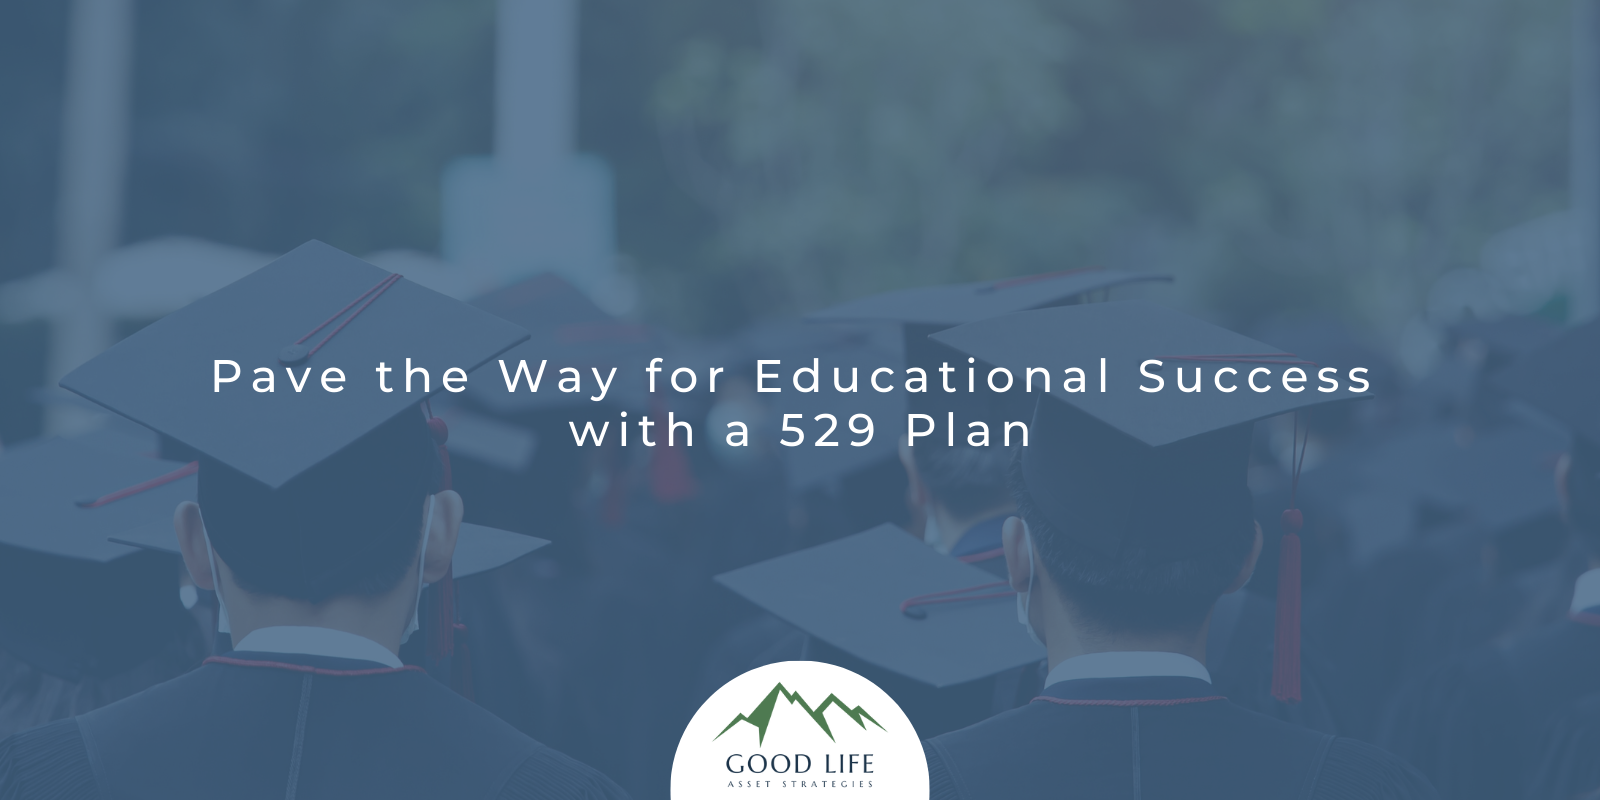 Pave the Way for Educational Success with a 529 Plan